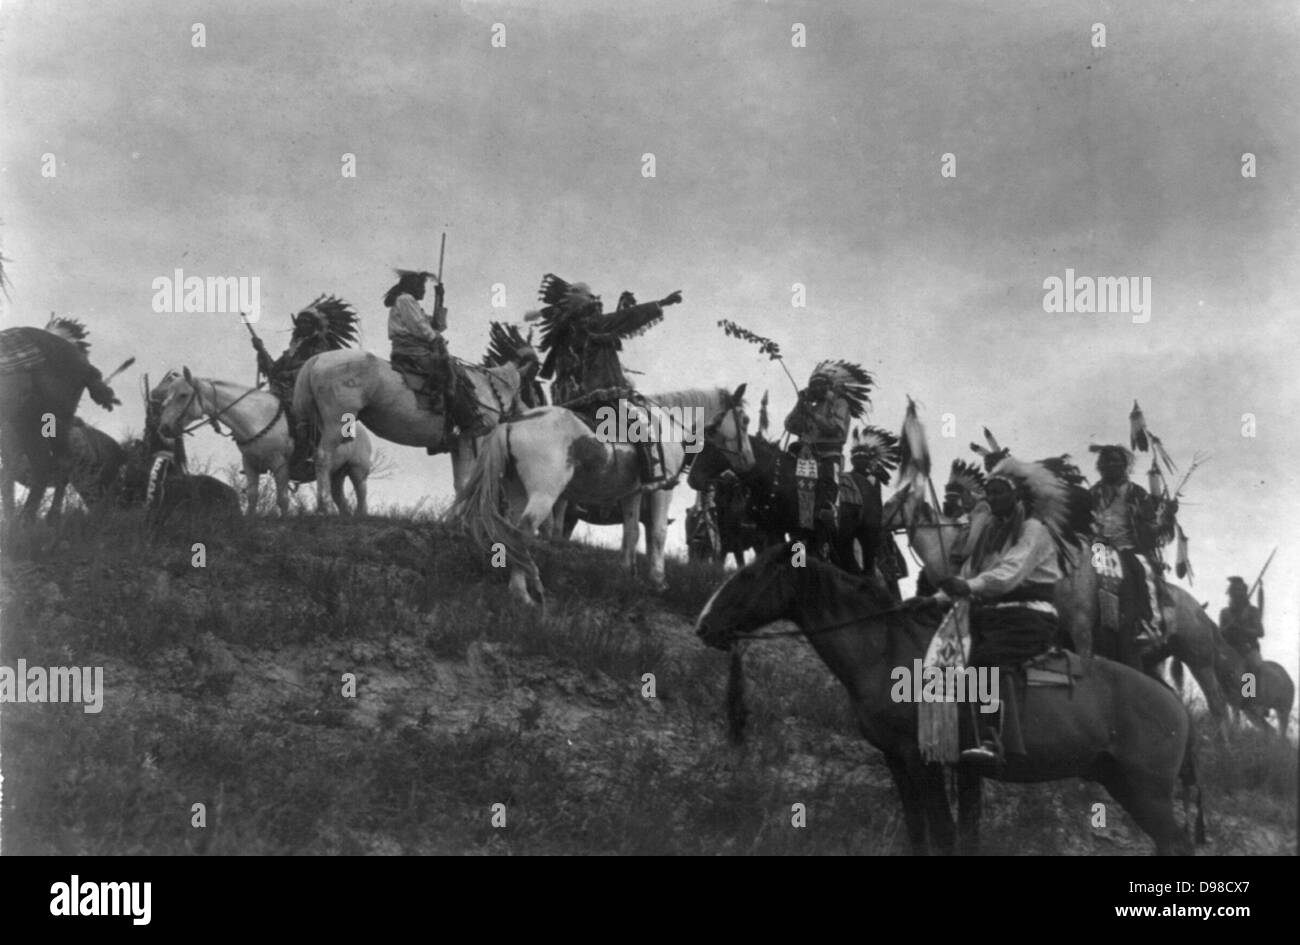 Native American Indians on horseback on hill, c1907. Photograph by Edward Curtis (1868-1952). Stock Photo